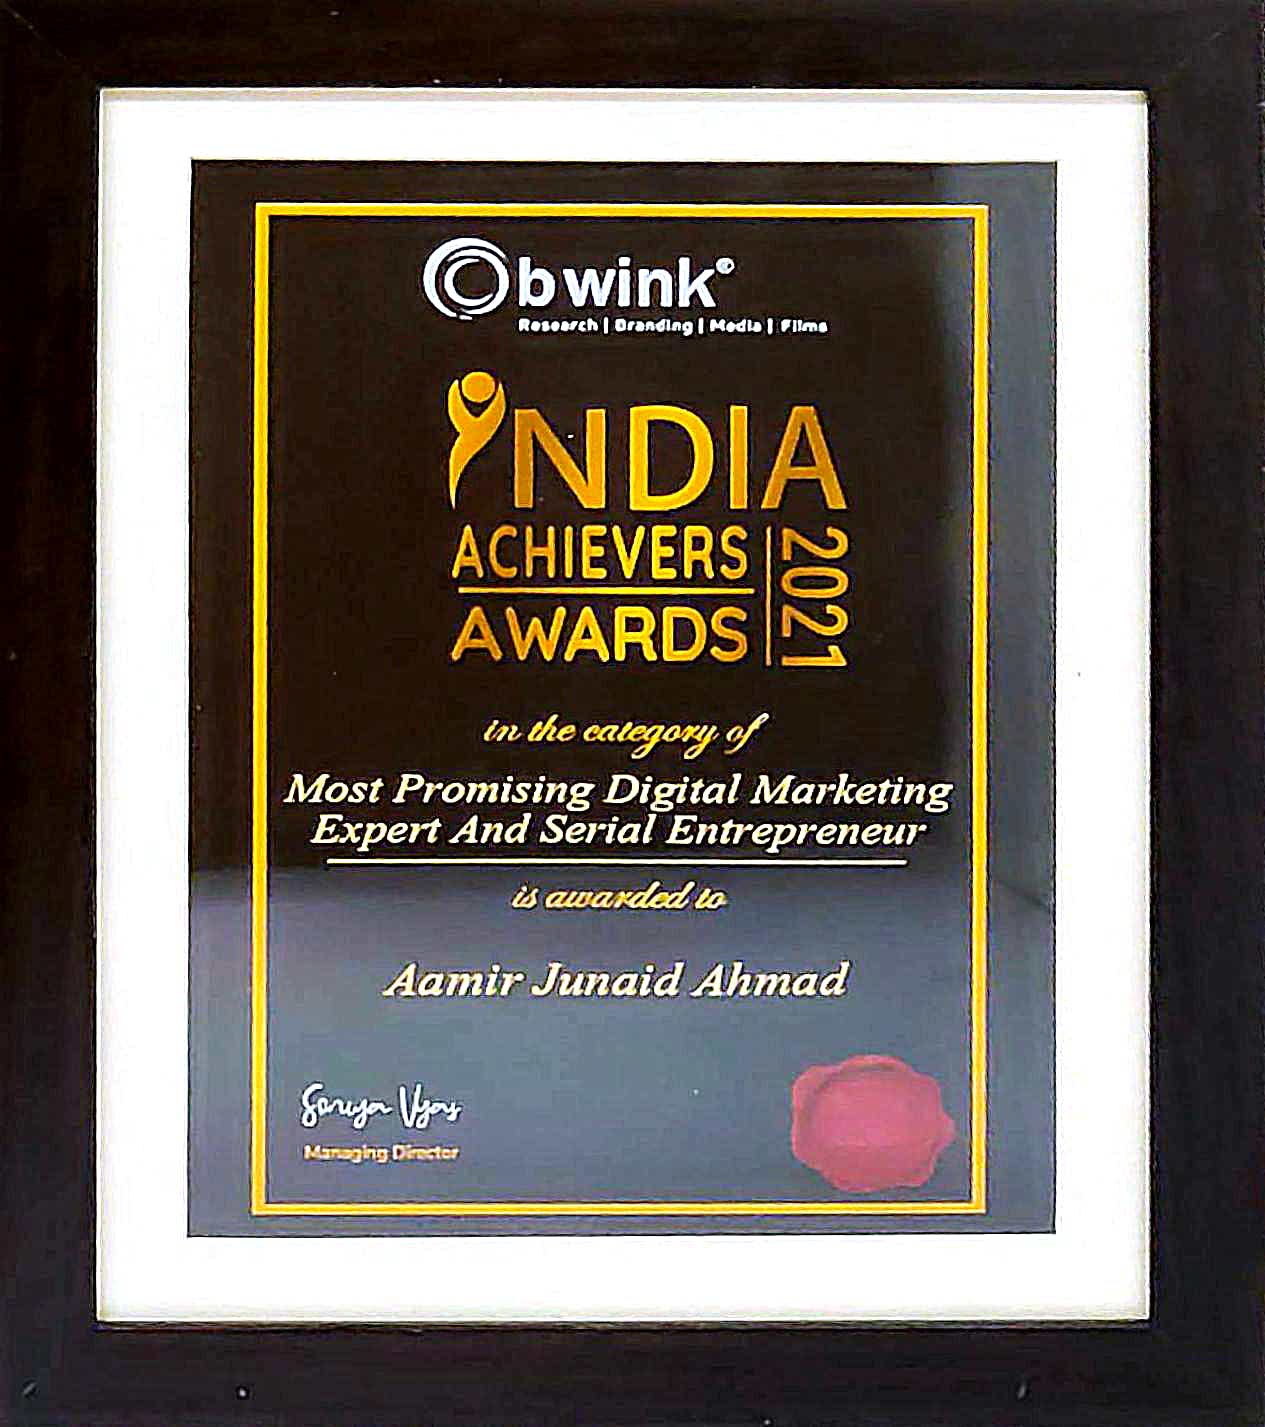  Software Services and Solutions has been awarded as the most promising digital marketing expert and serial entrepreneur